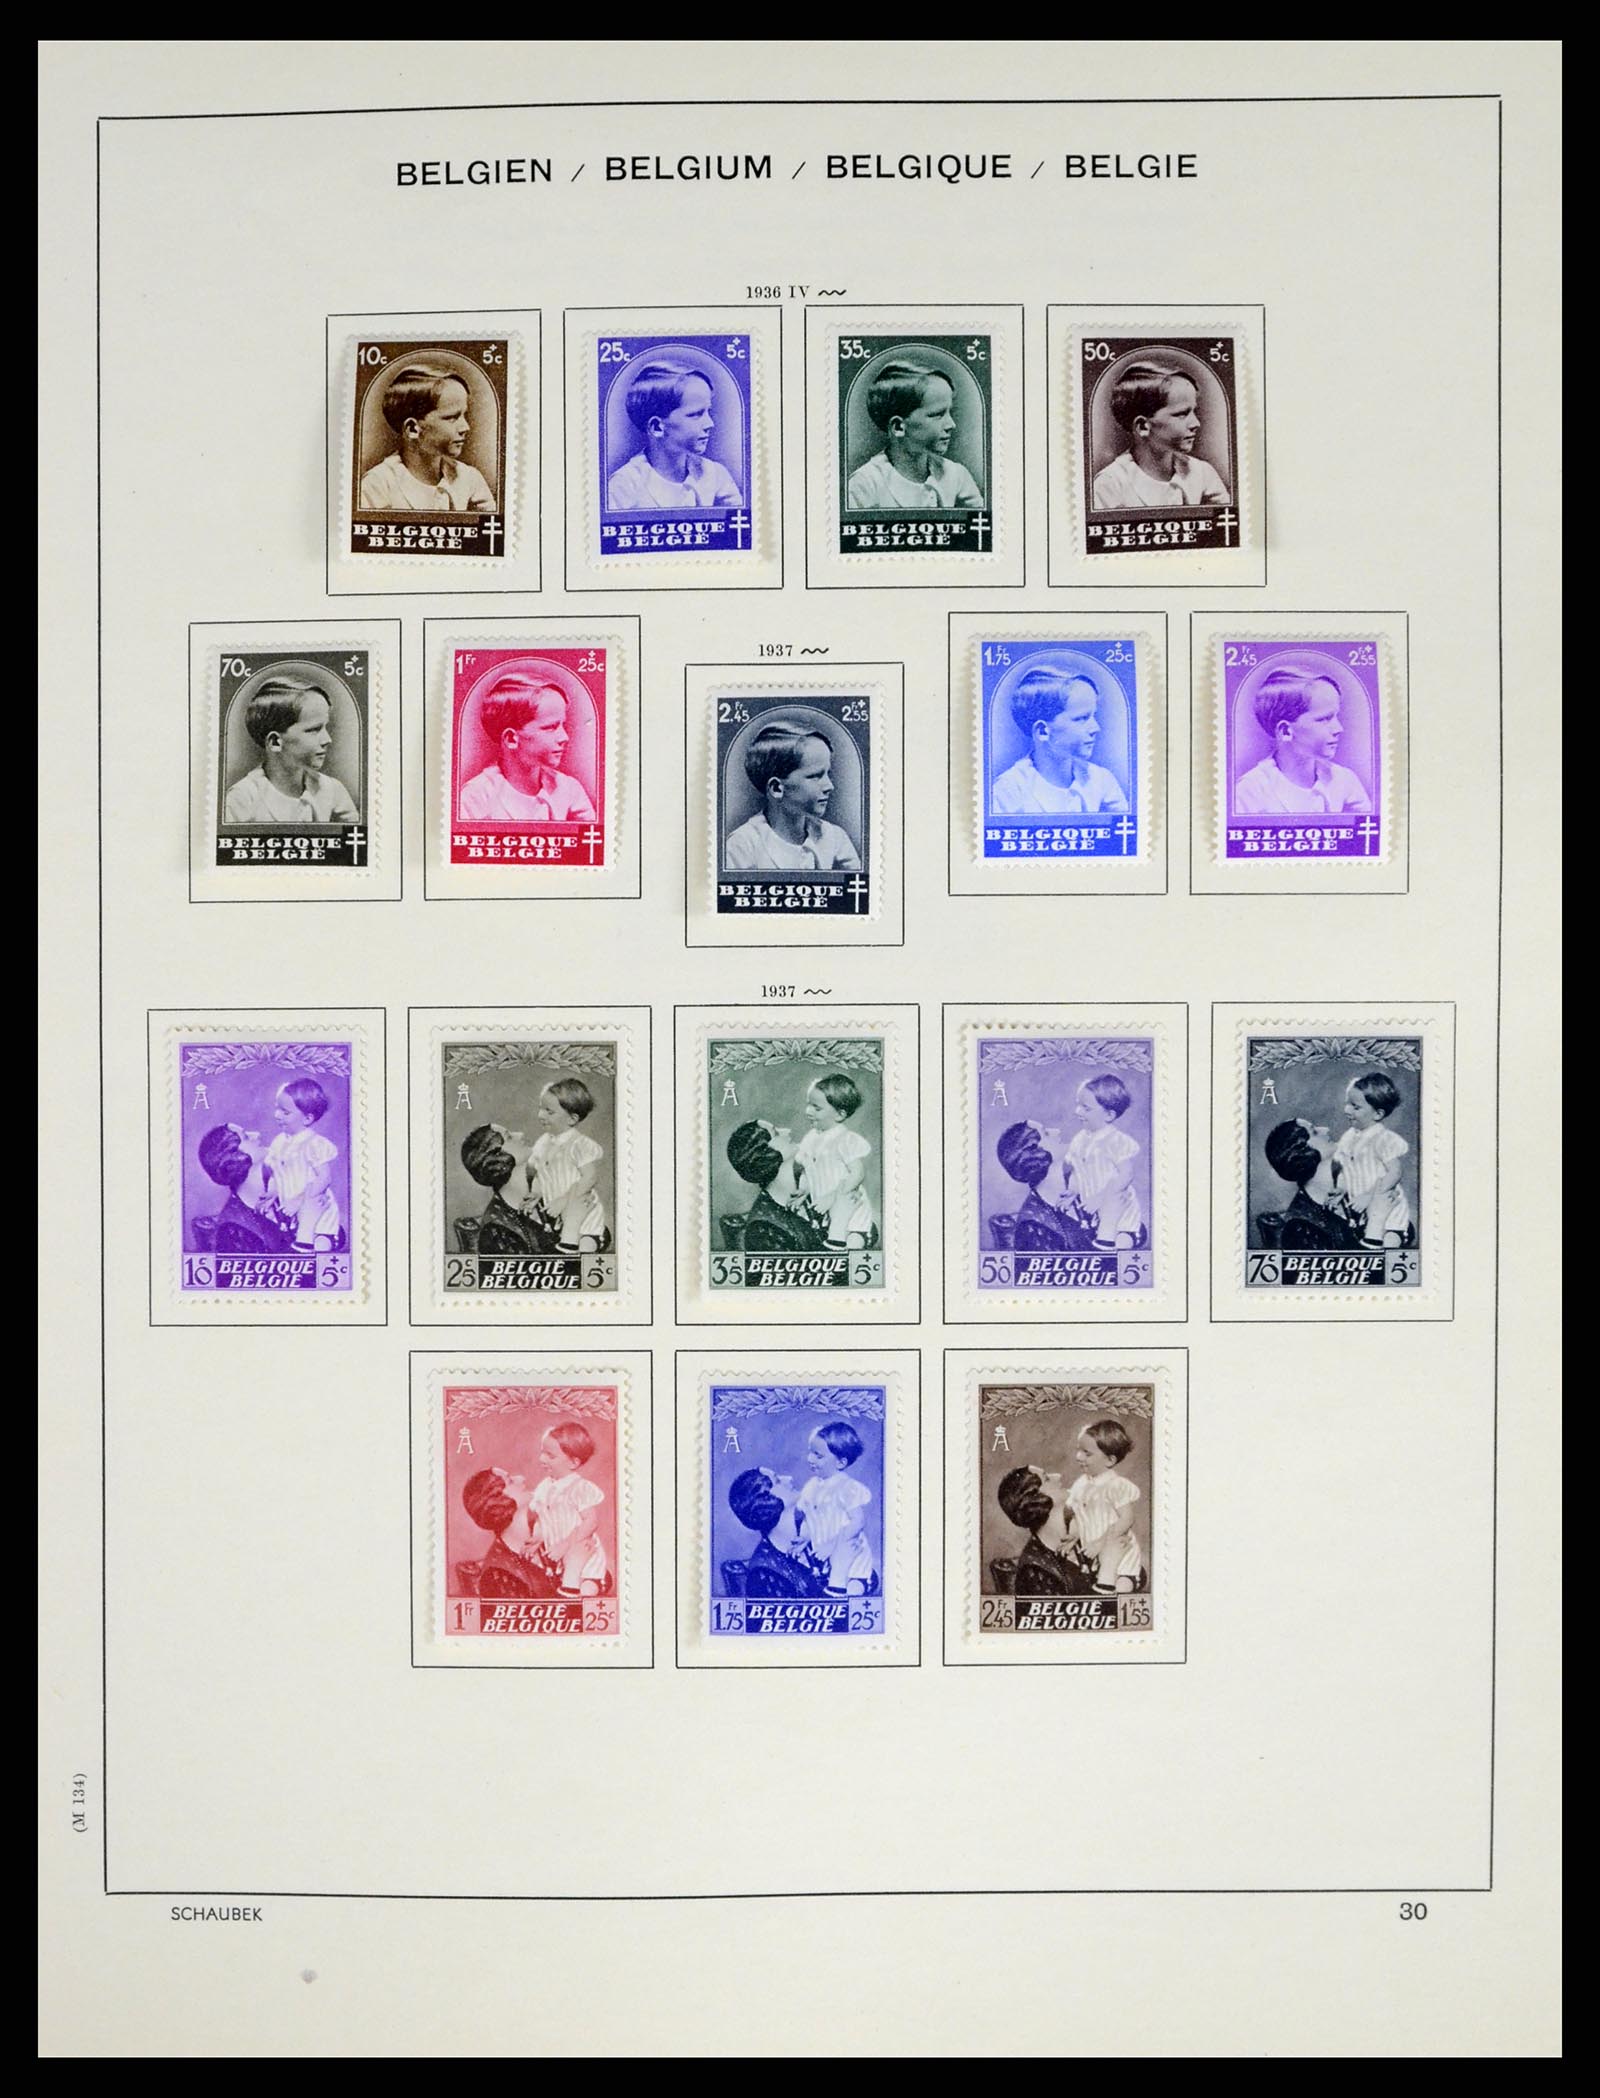 37595 030 - Stamp collection 37595 Super collection Belgium 1849-2015!